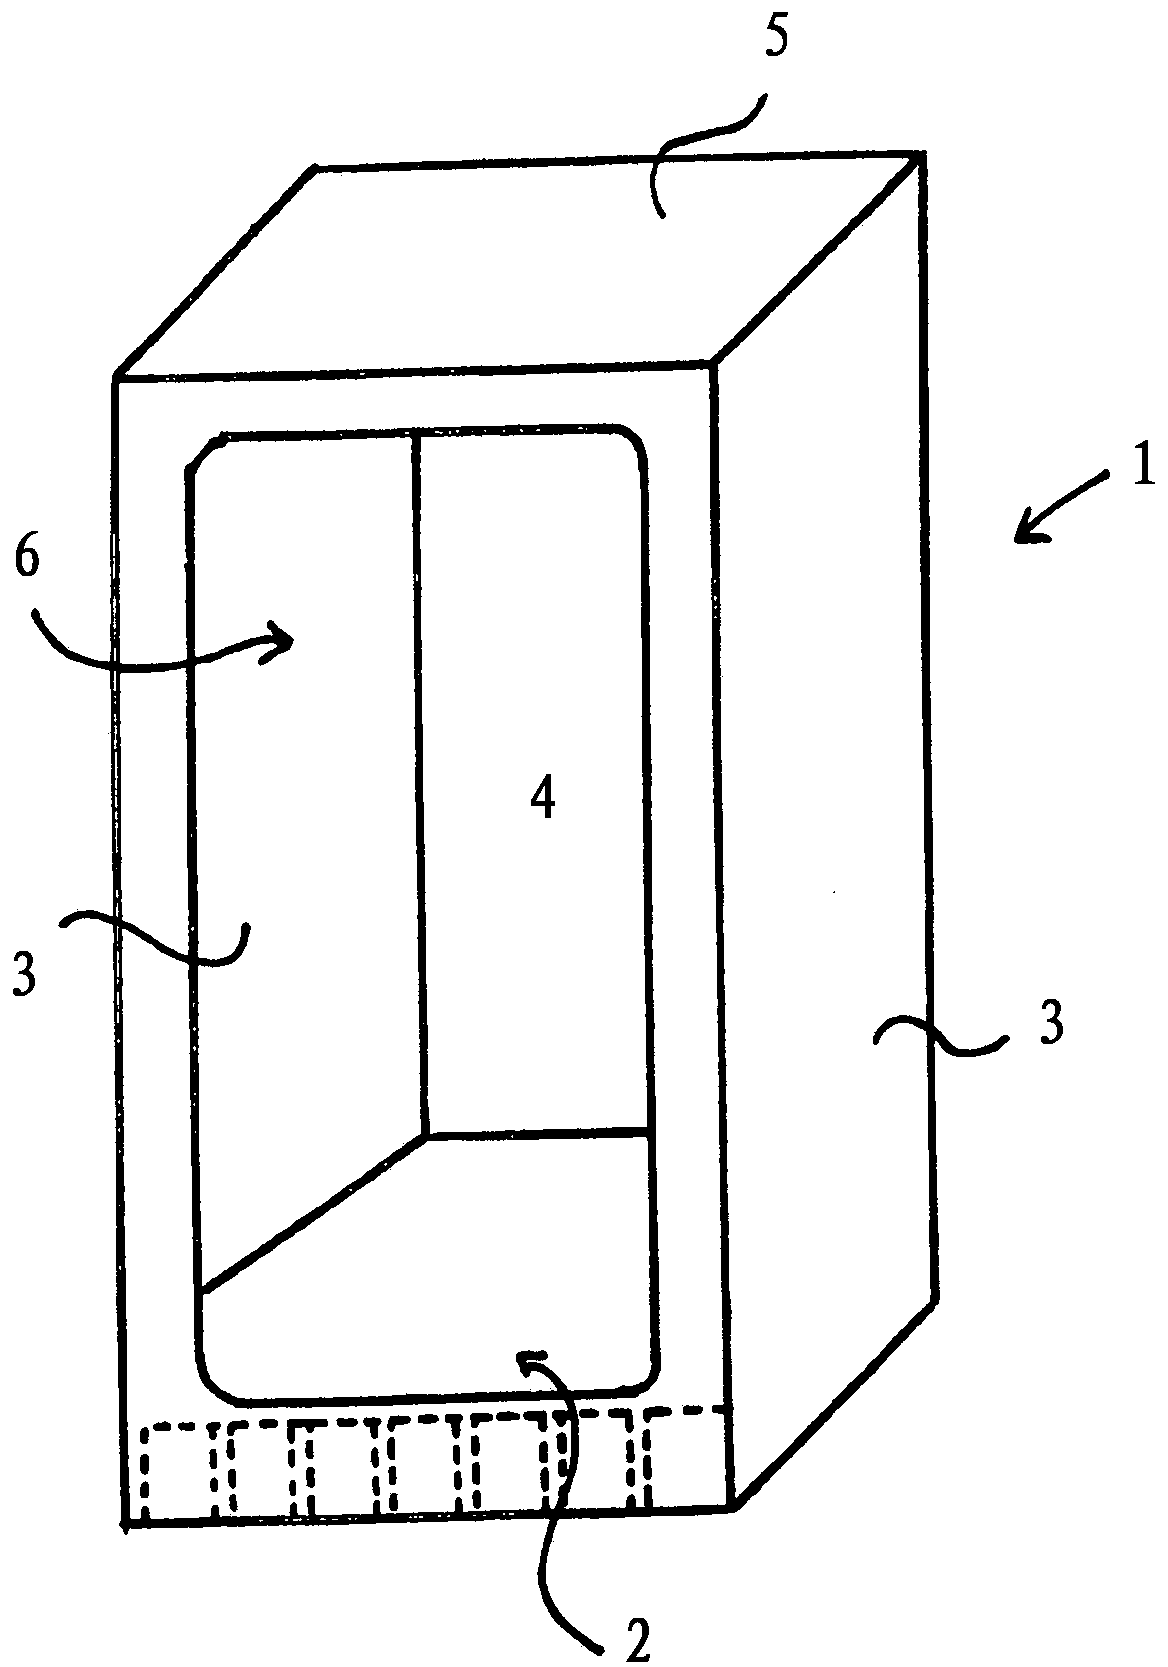 Elevator cab and method for manufacturing same